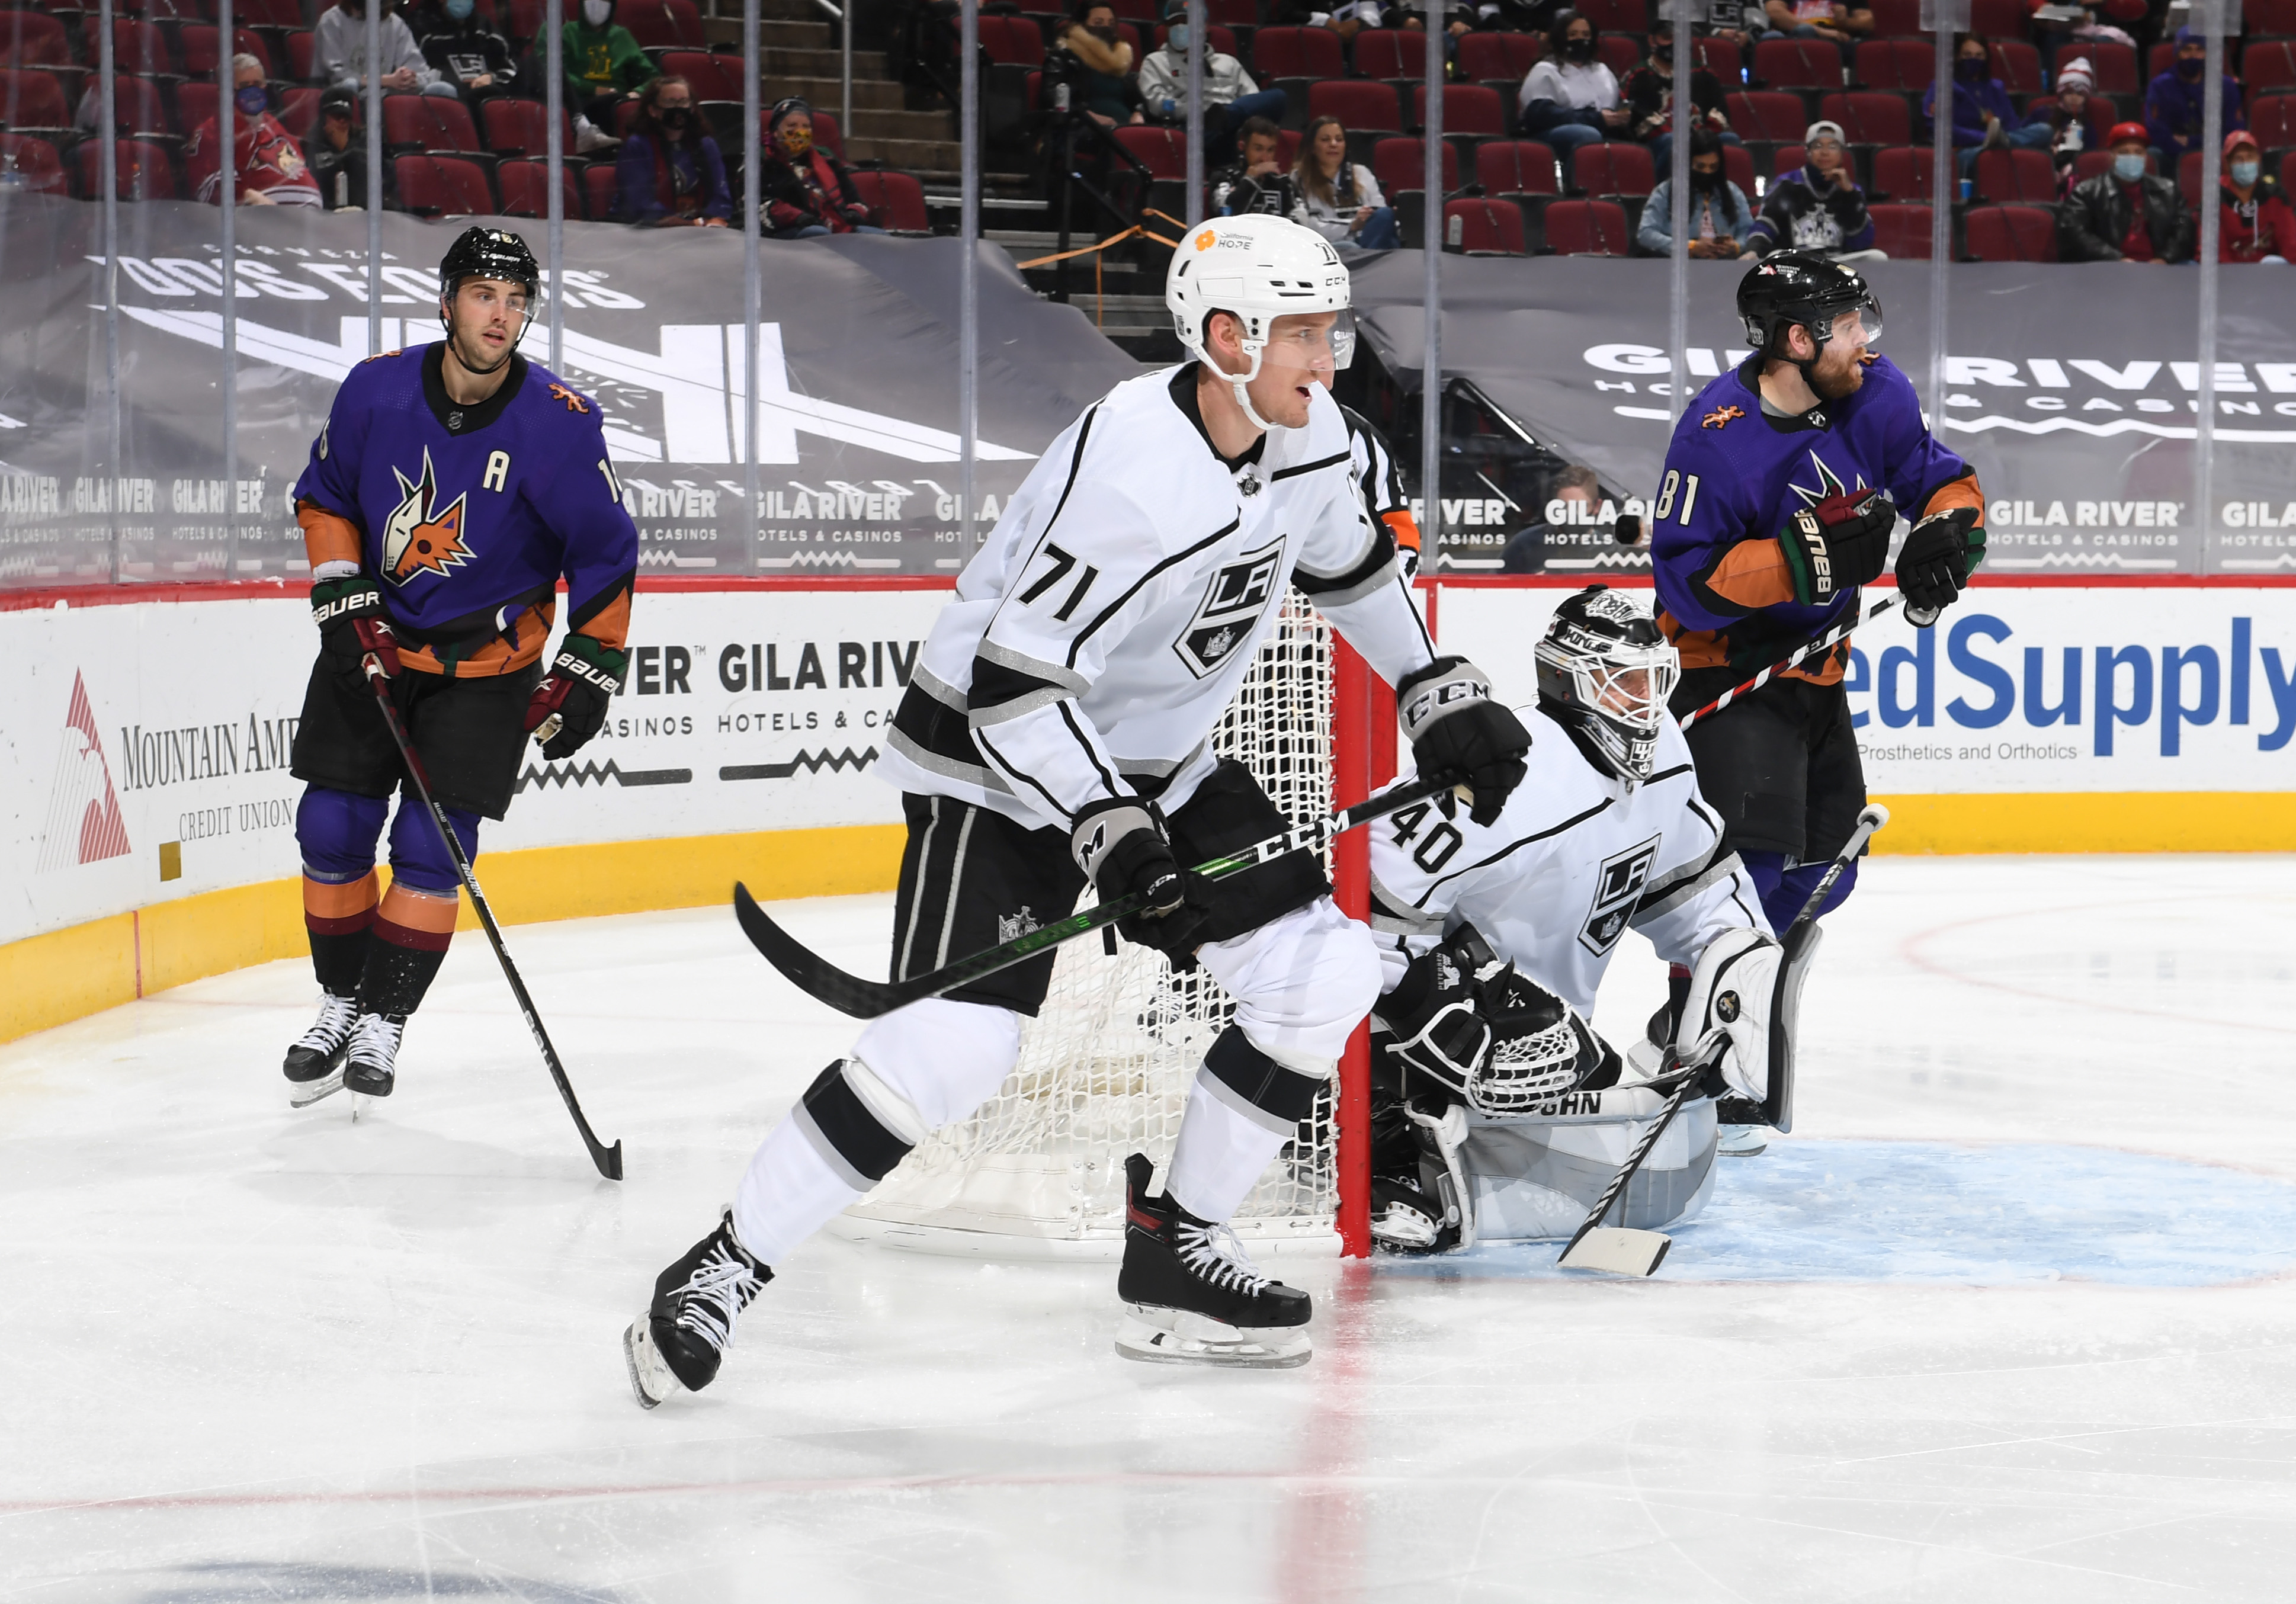 Austin Strand #71 of the Los Angeles Kings skates up ice against the Arizona Coyotes at Gila River Arena on February 20, 2021 in Glendale, Arizona.